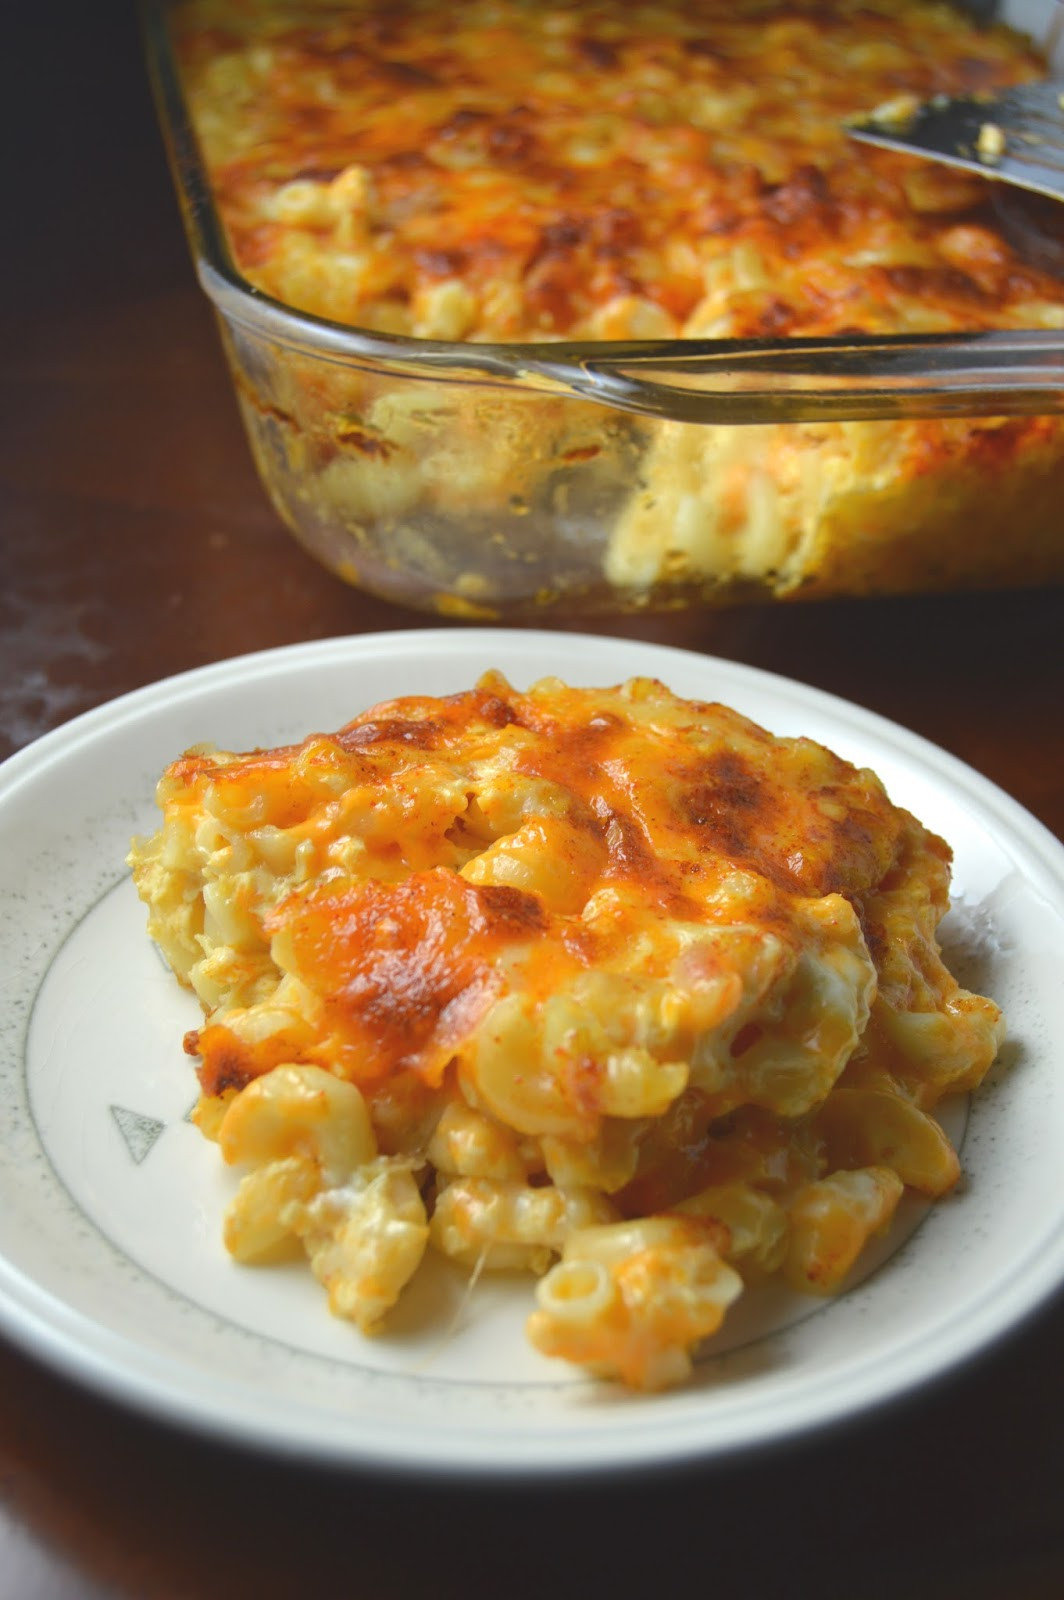 Best Baked Macaroni and Cheese Recipe Best Of Baked Macaroni and Cheese